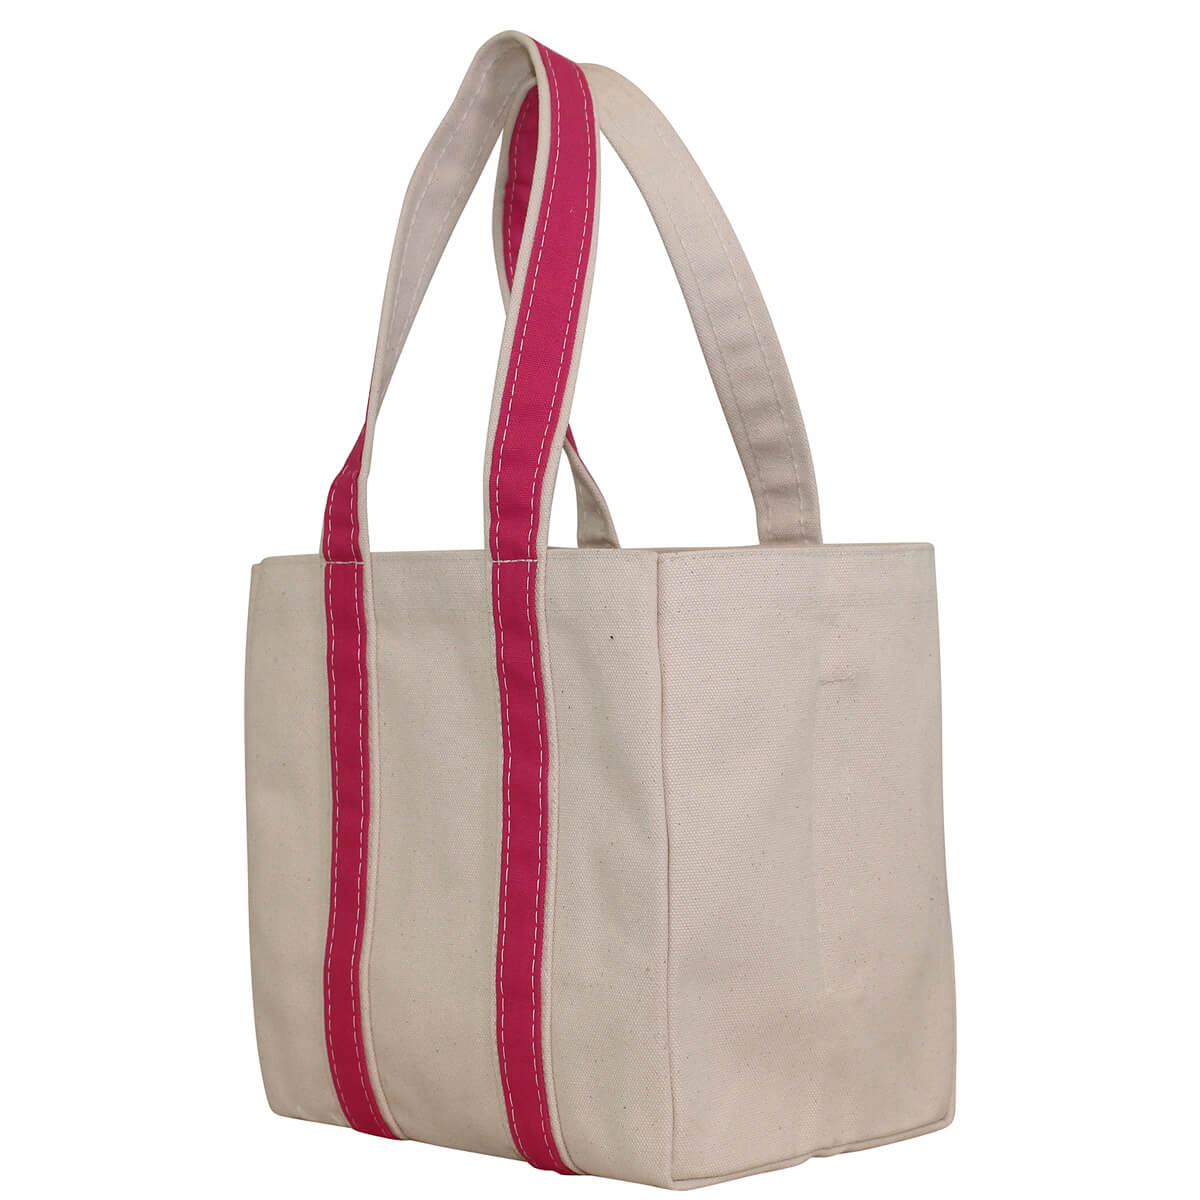 Four Bottle Wine Tote Bag